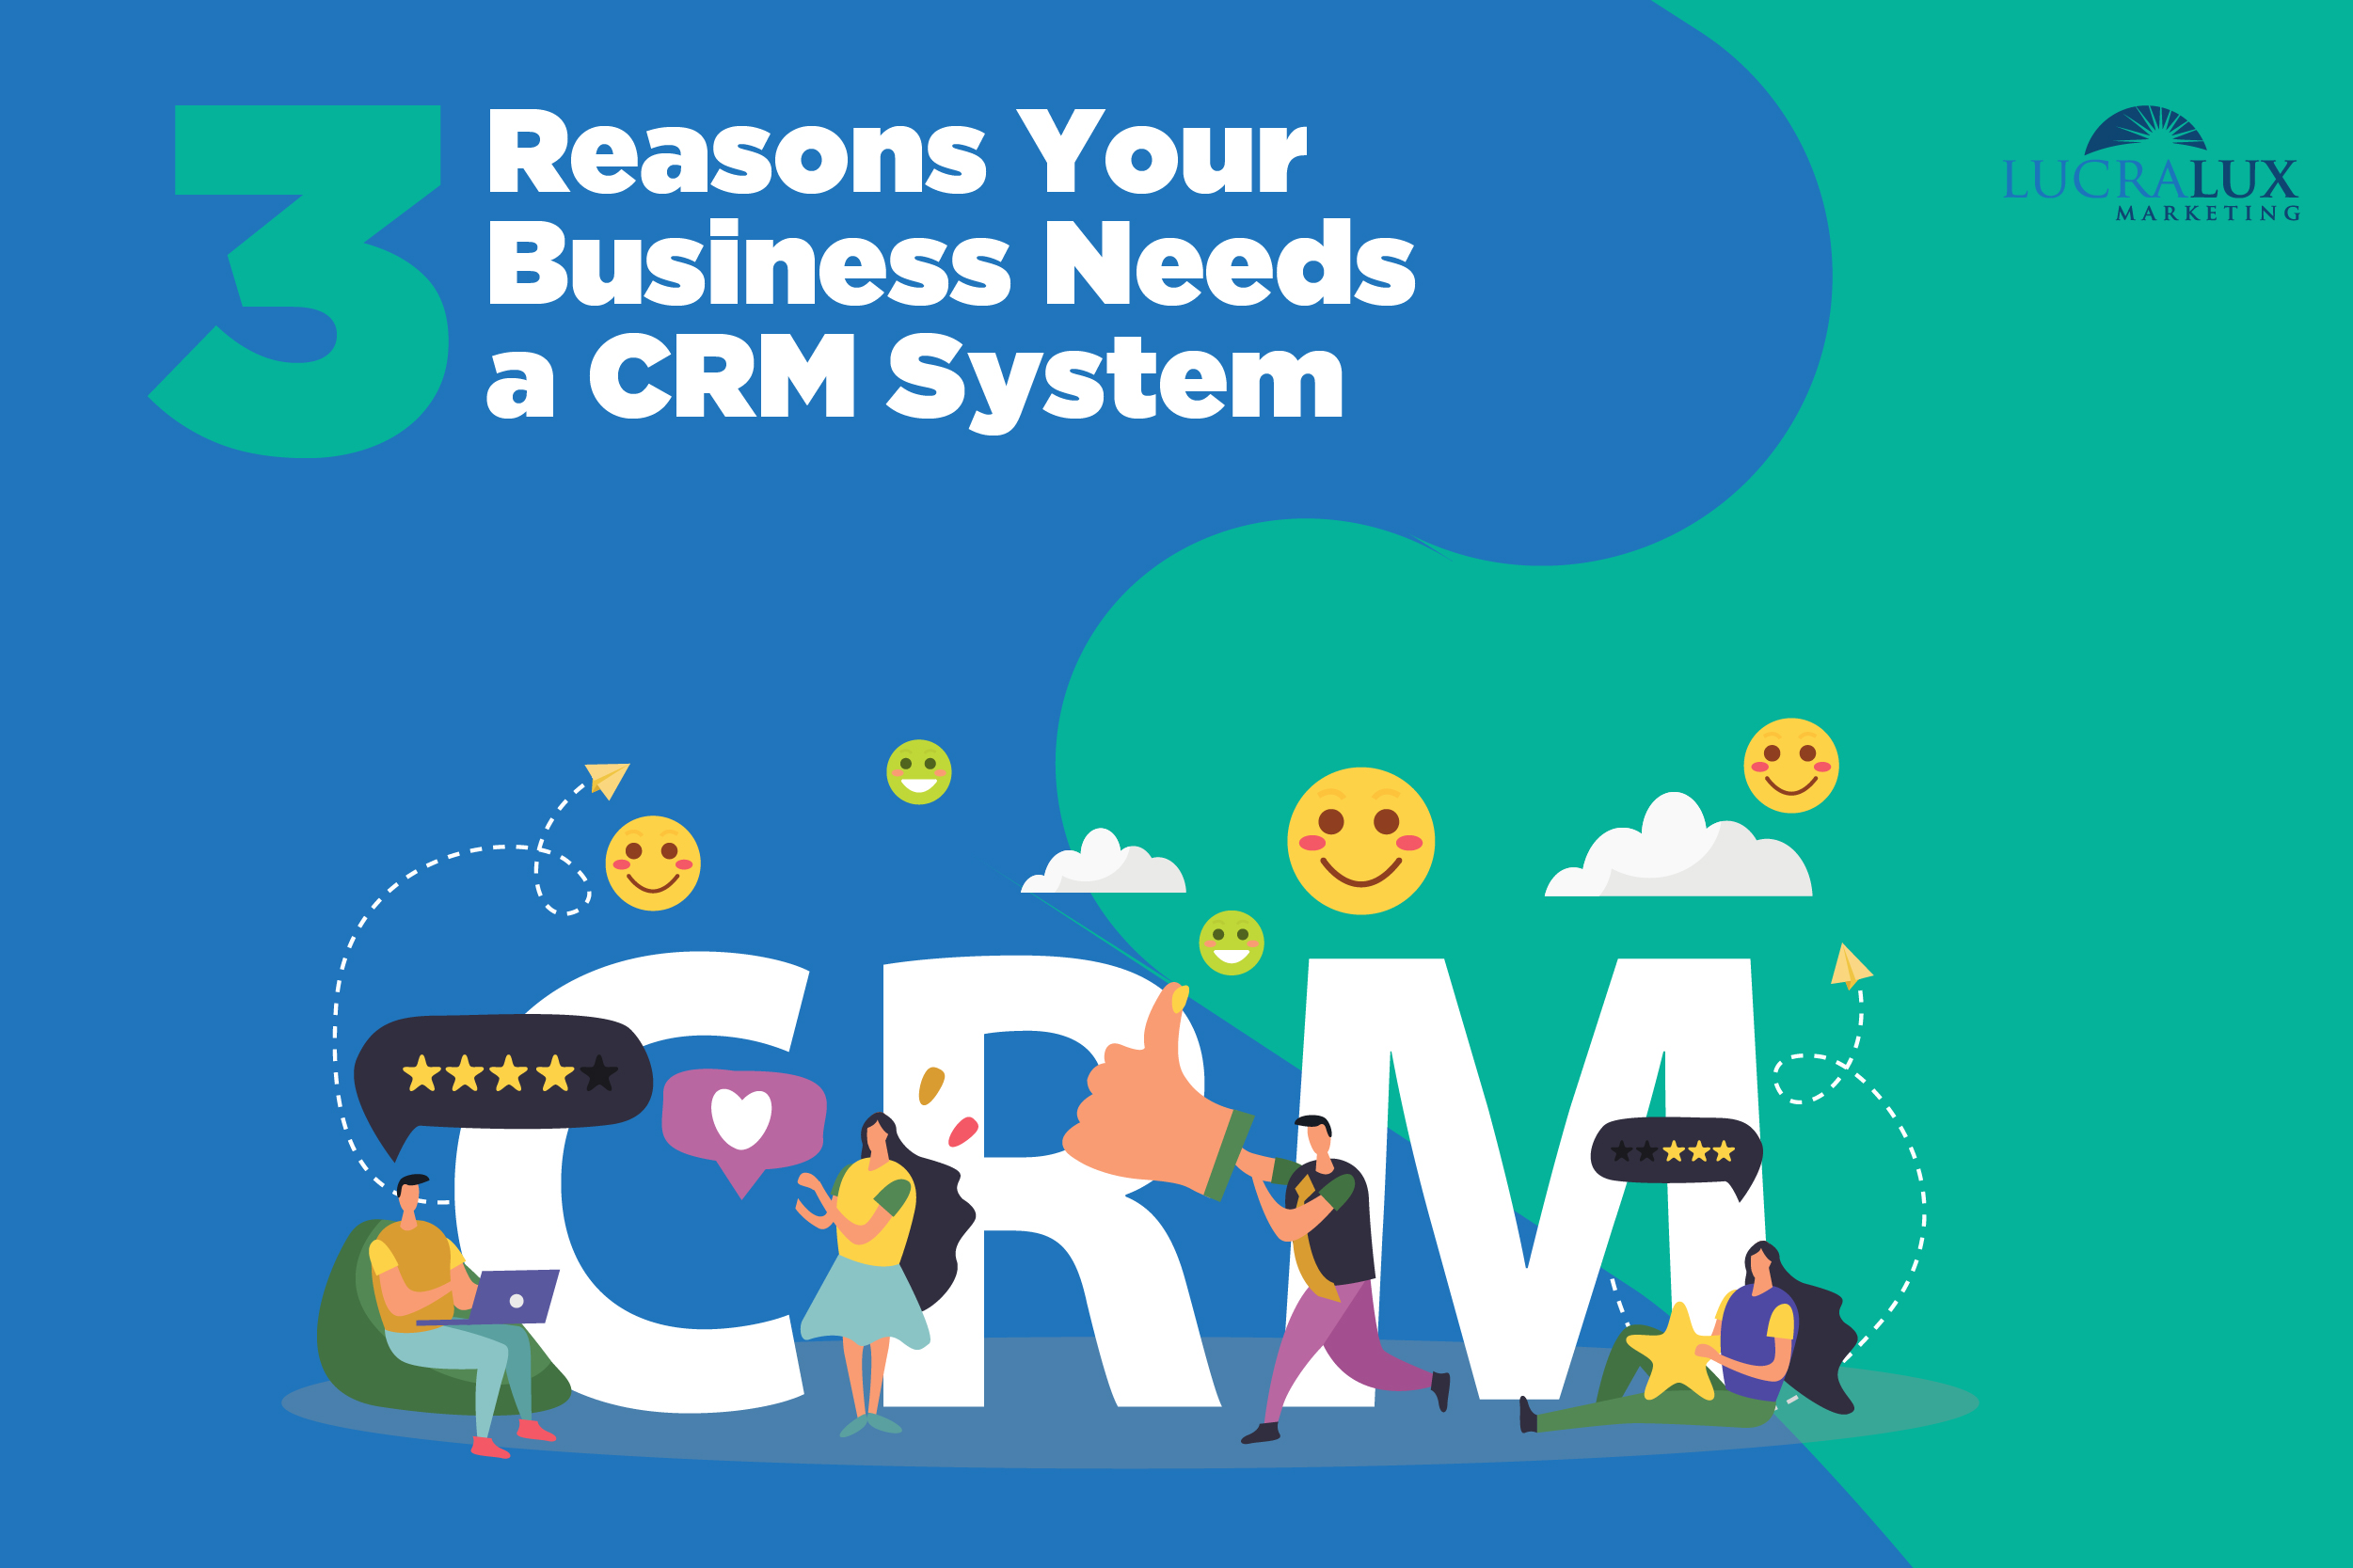 3 reasons yoru business needs a CRM system